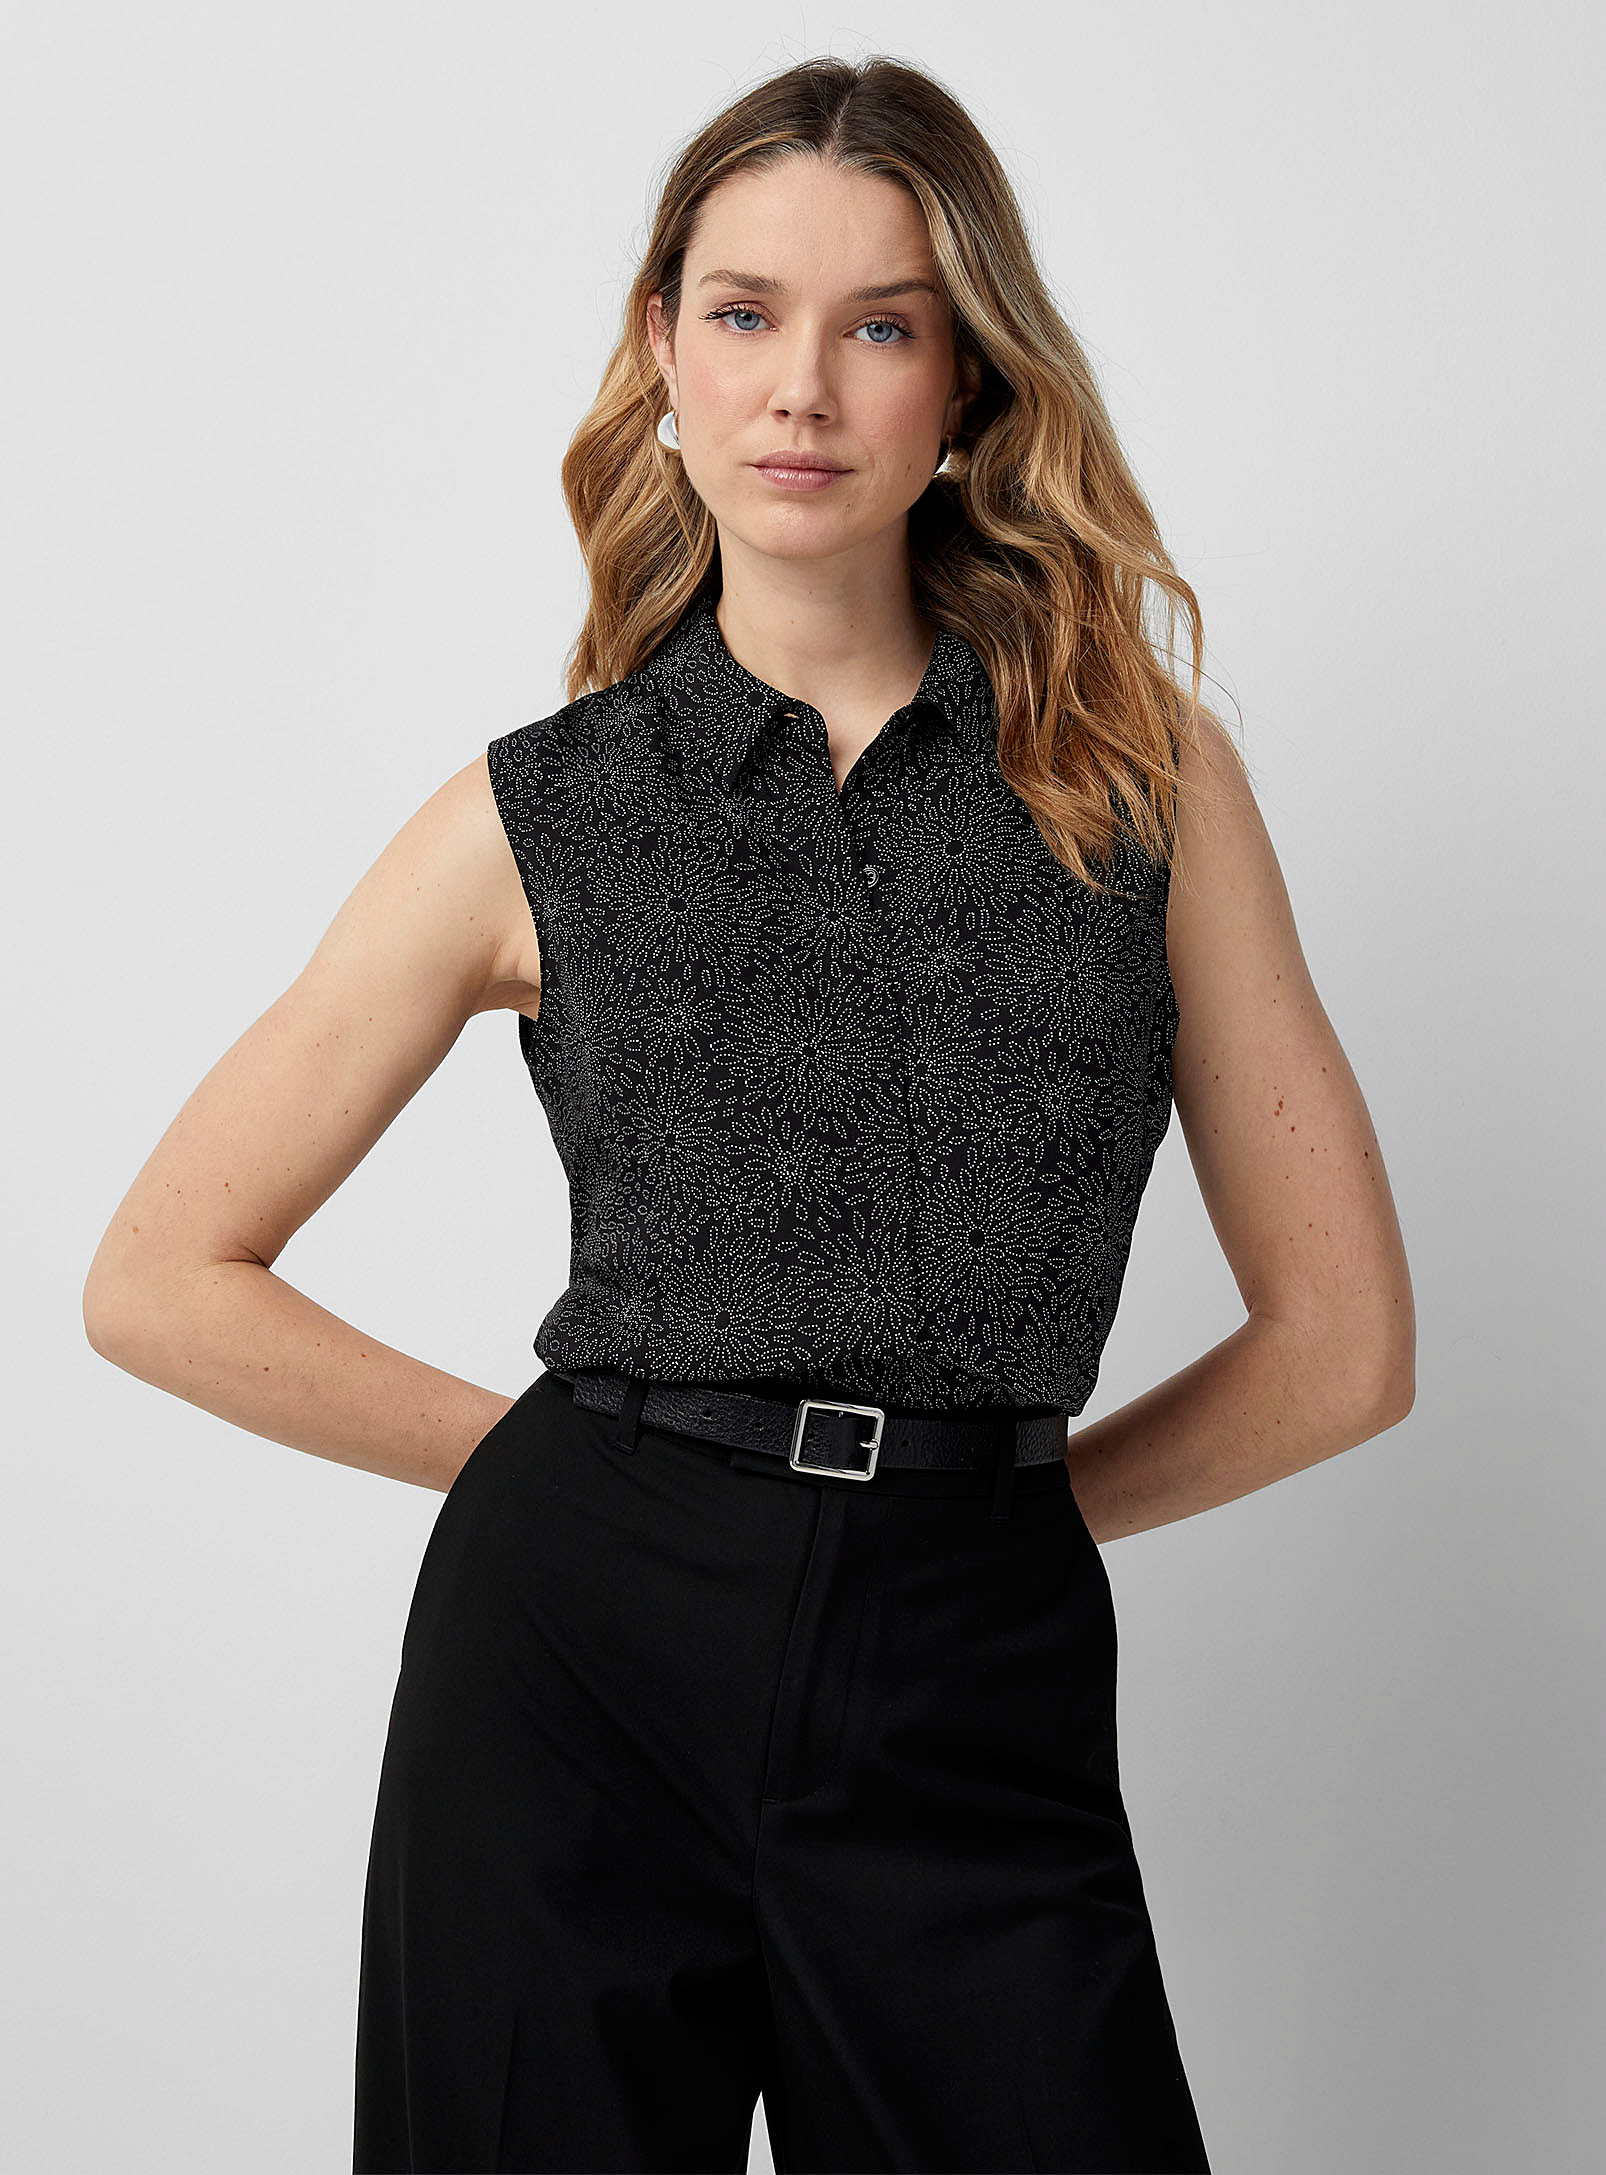 Contemporaine Sleeveless Printed Shirt In Black And White